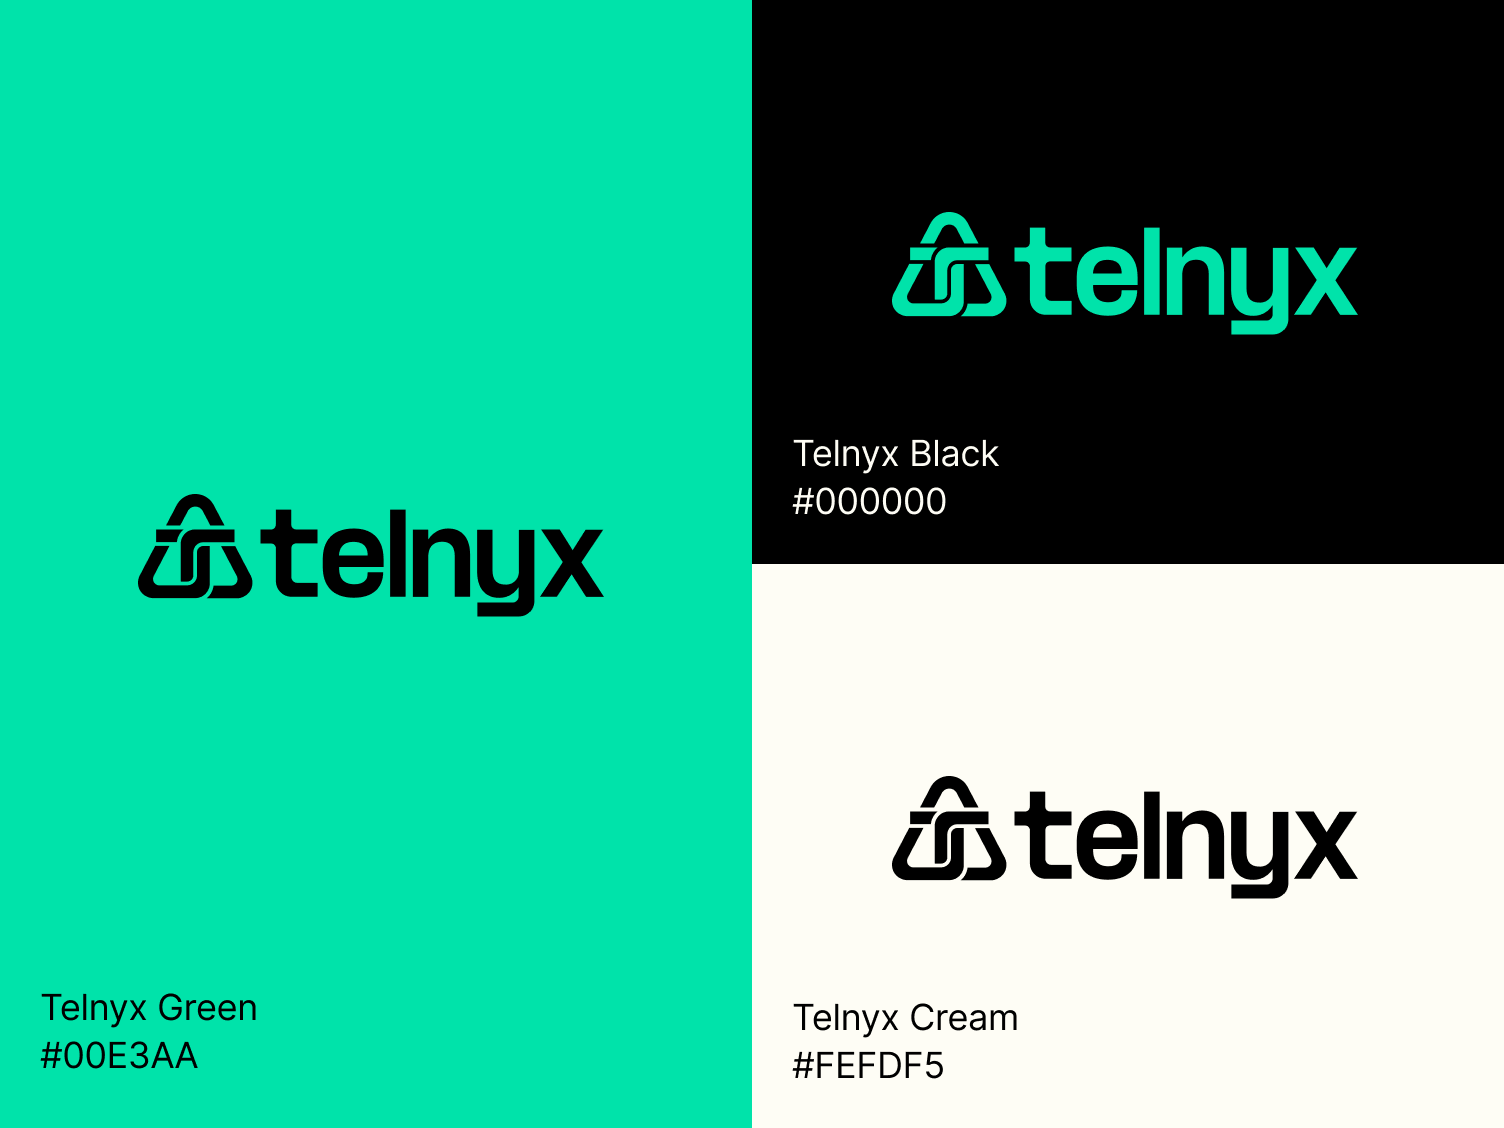 Green #00E3AA and black #000000 are our primary brand colors. 